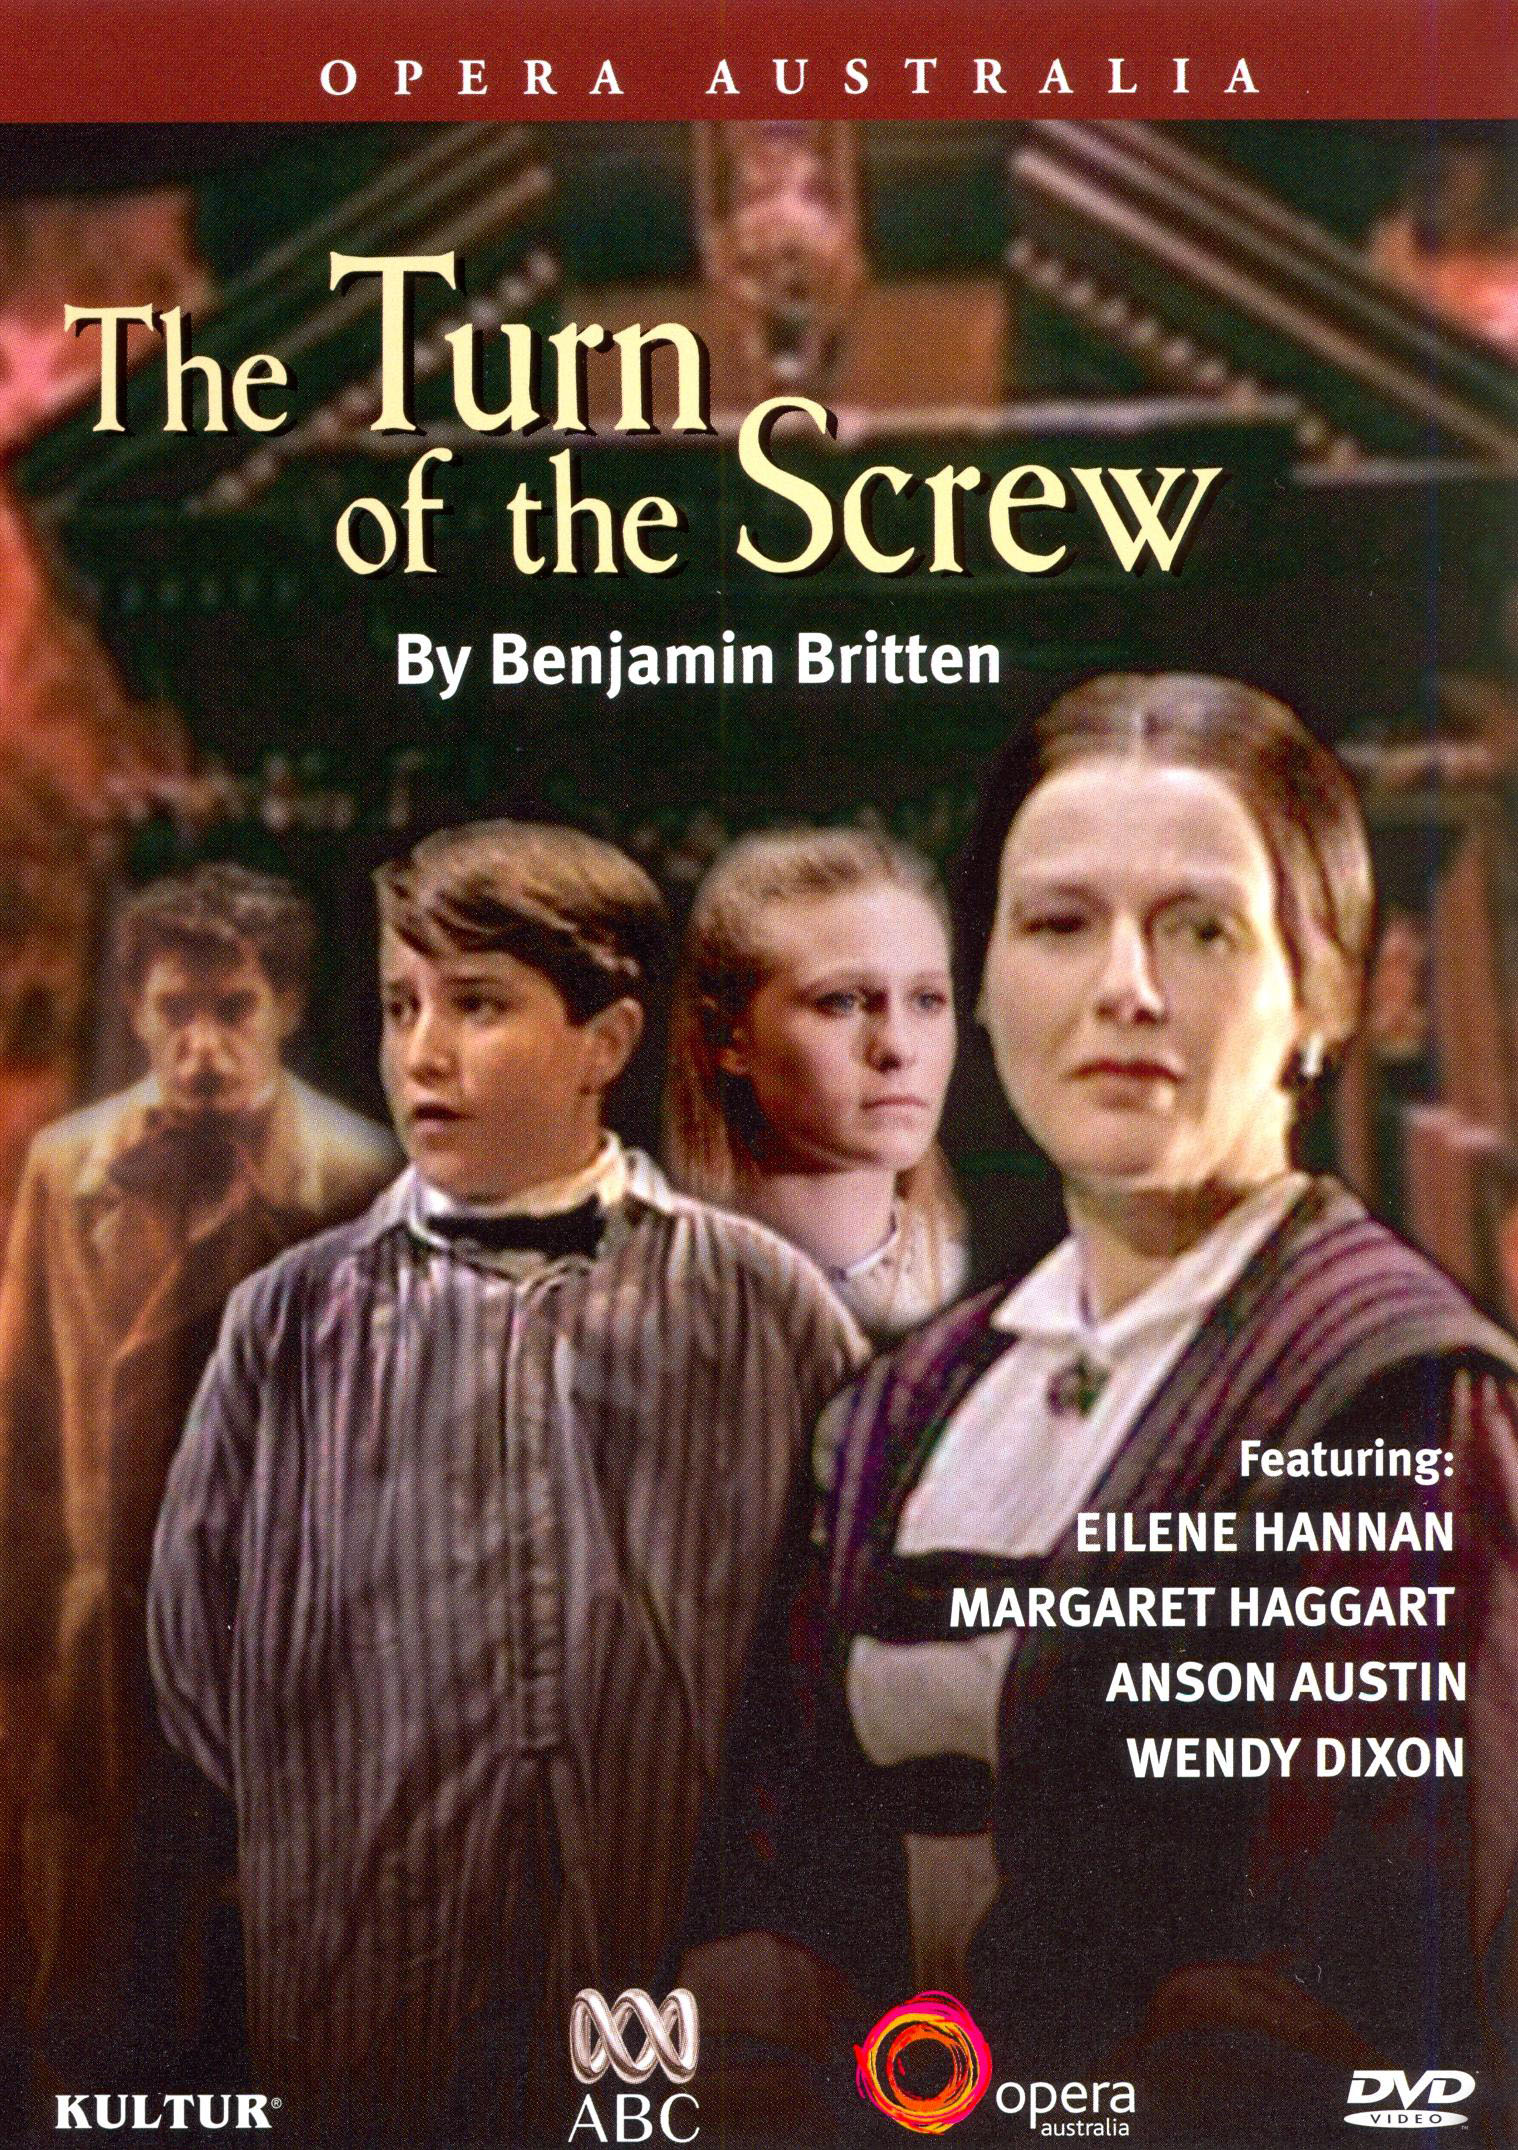 The Turn of the Screw (1991) - Neil Armfield | Cast and Crew | AllMovie